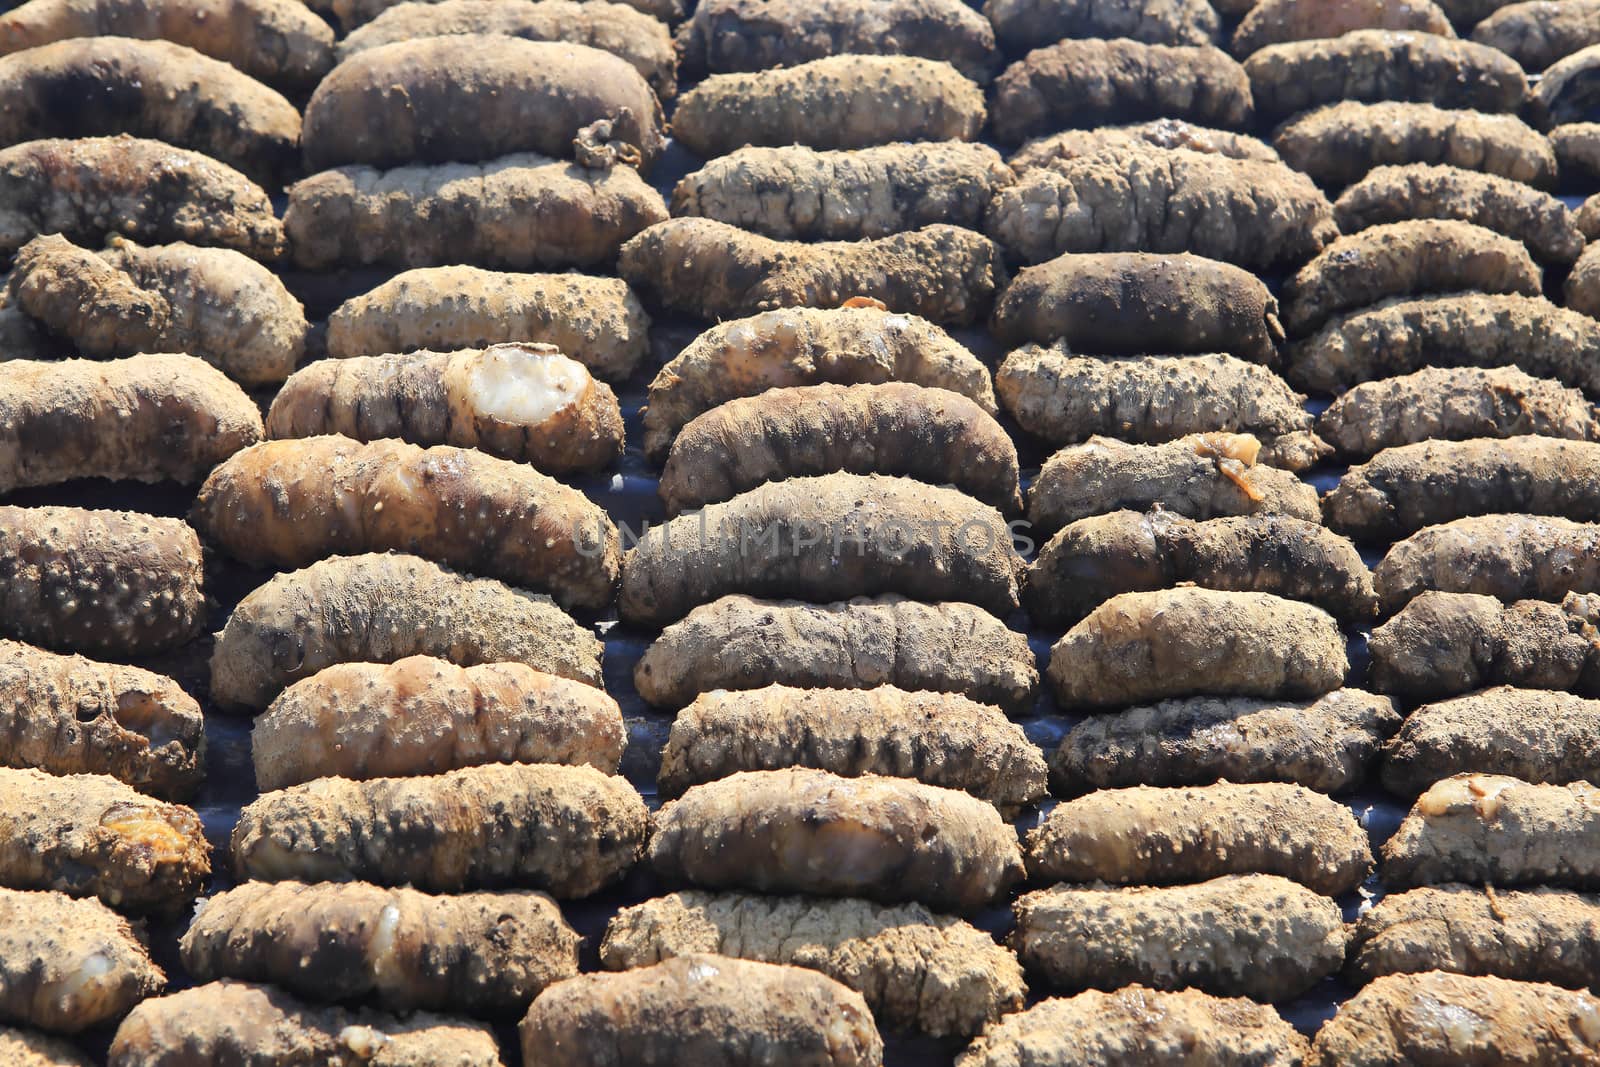 Drying Sea Cucumber Outdoor  by rufous